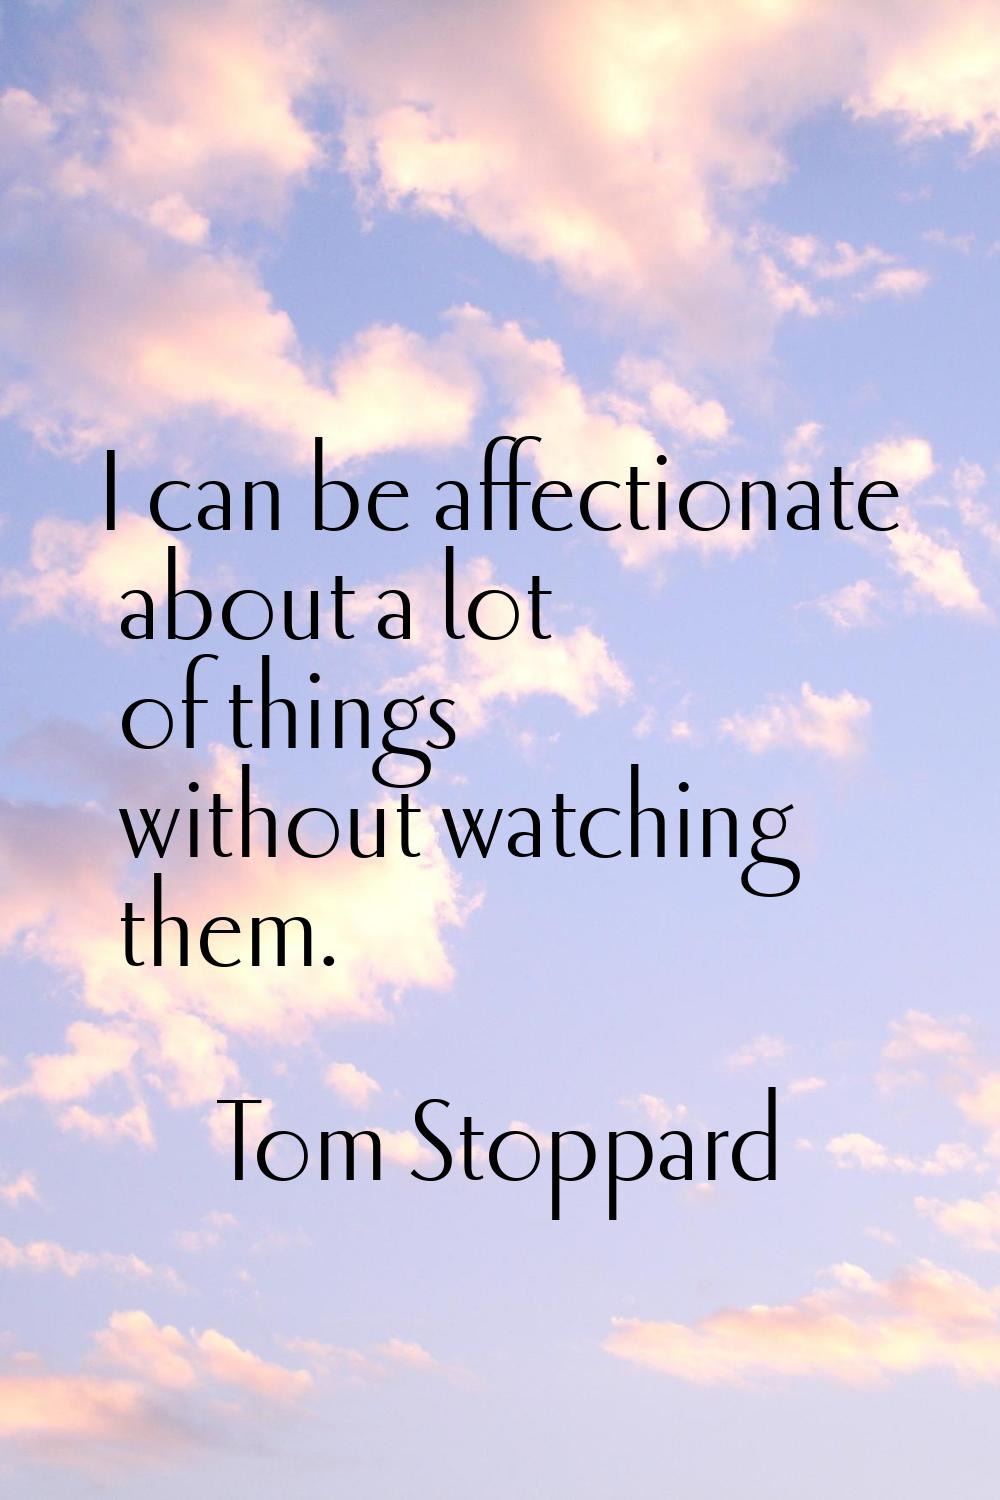 I can be affectionate about a lot of things without watching them.